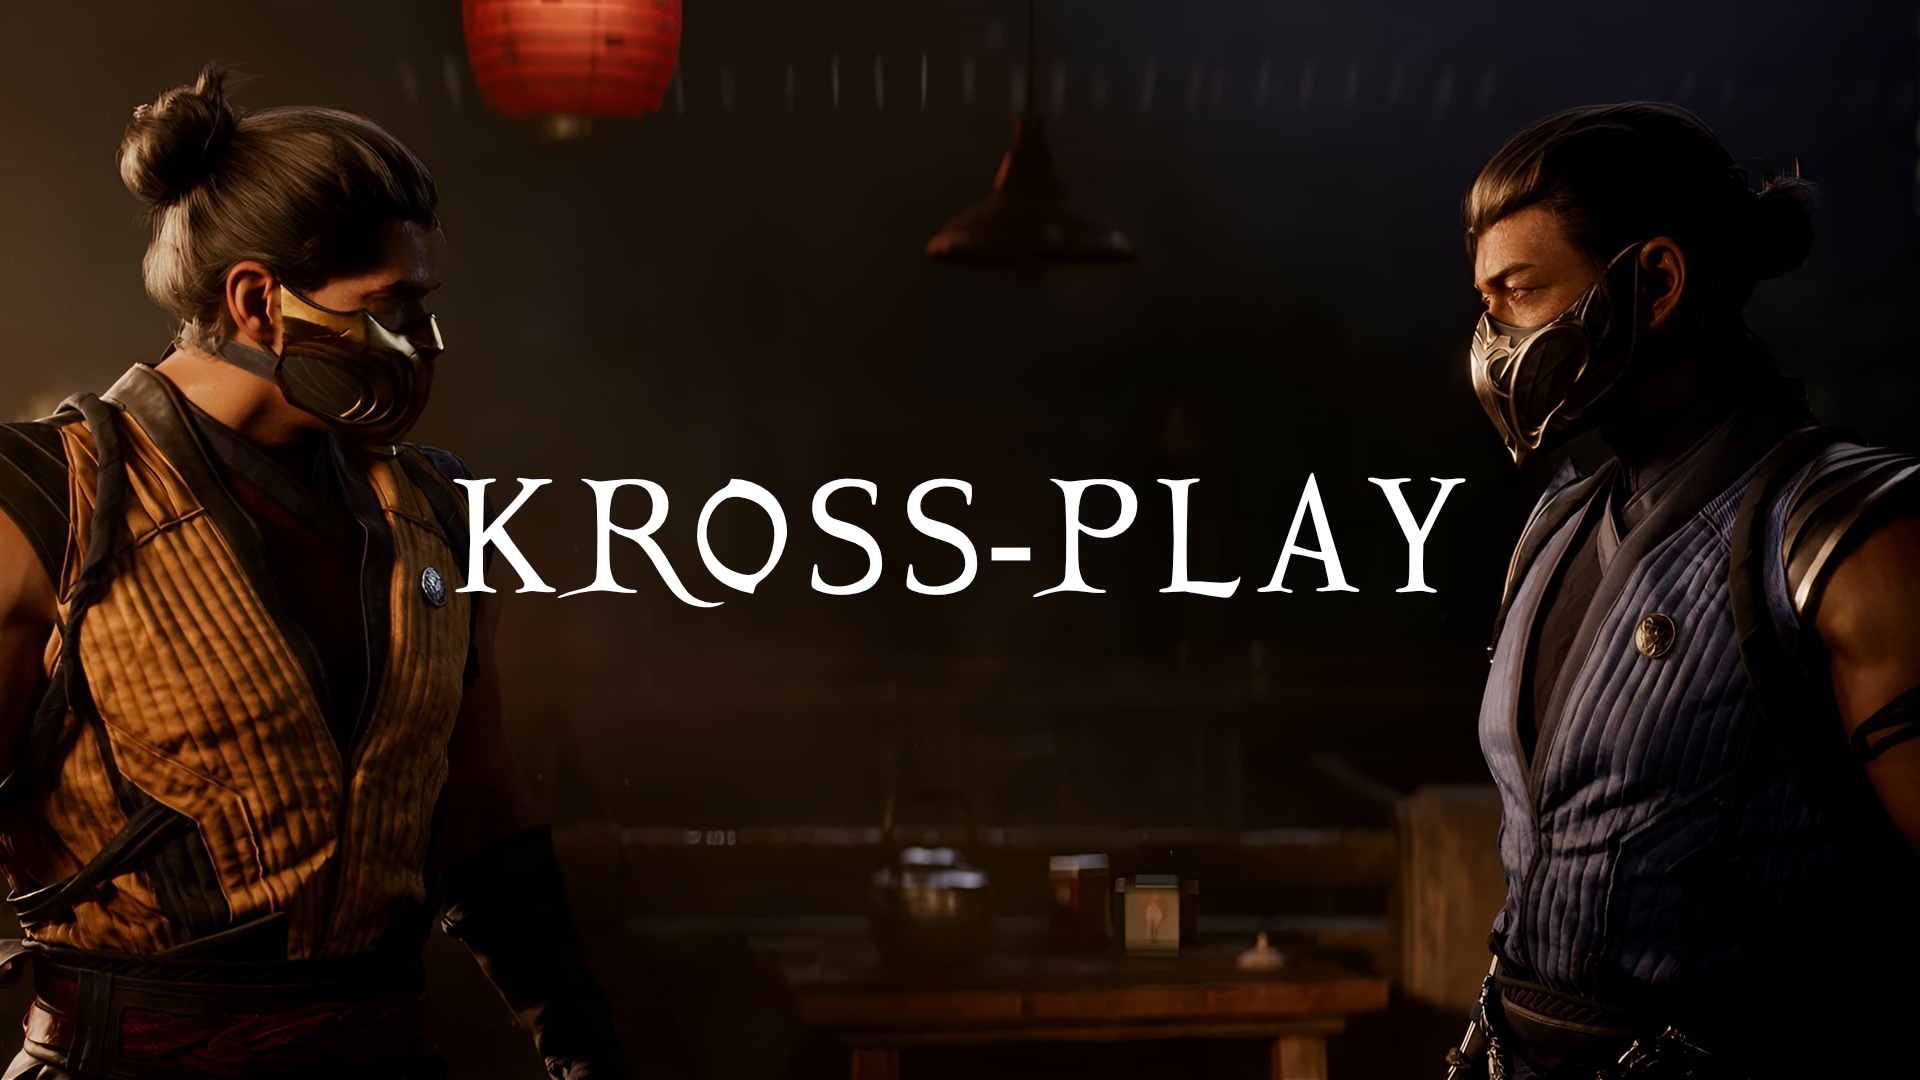 Mortal Kombat 1 is adding cross-play support in February